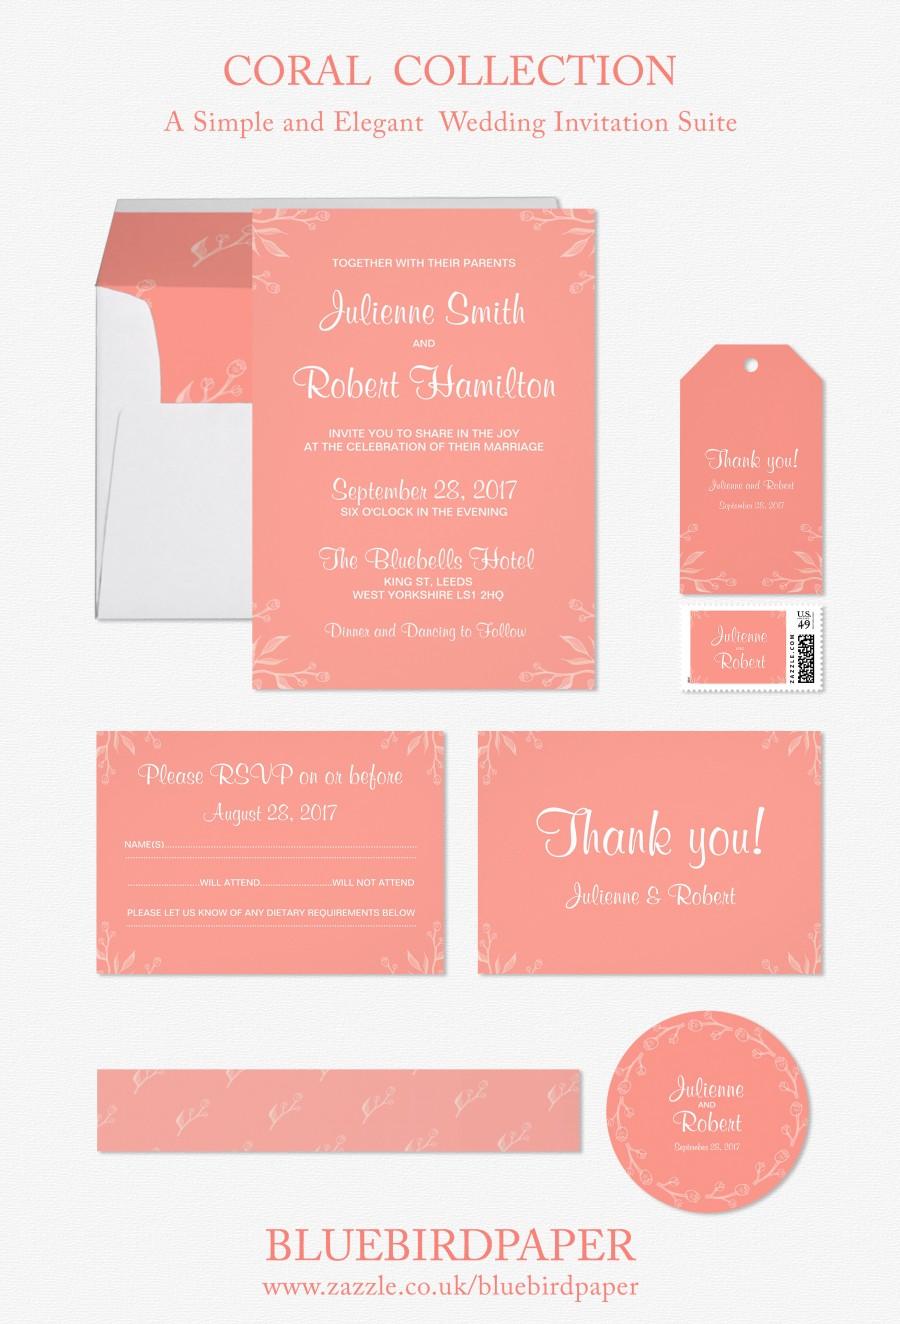 Wedding - Coral, a Simple and Elegant Wedding Suite